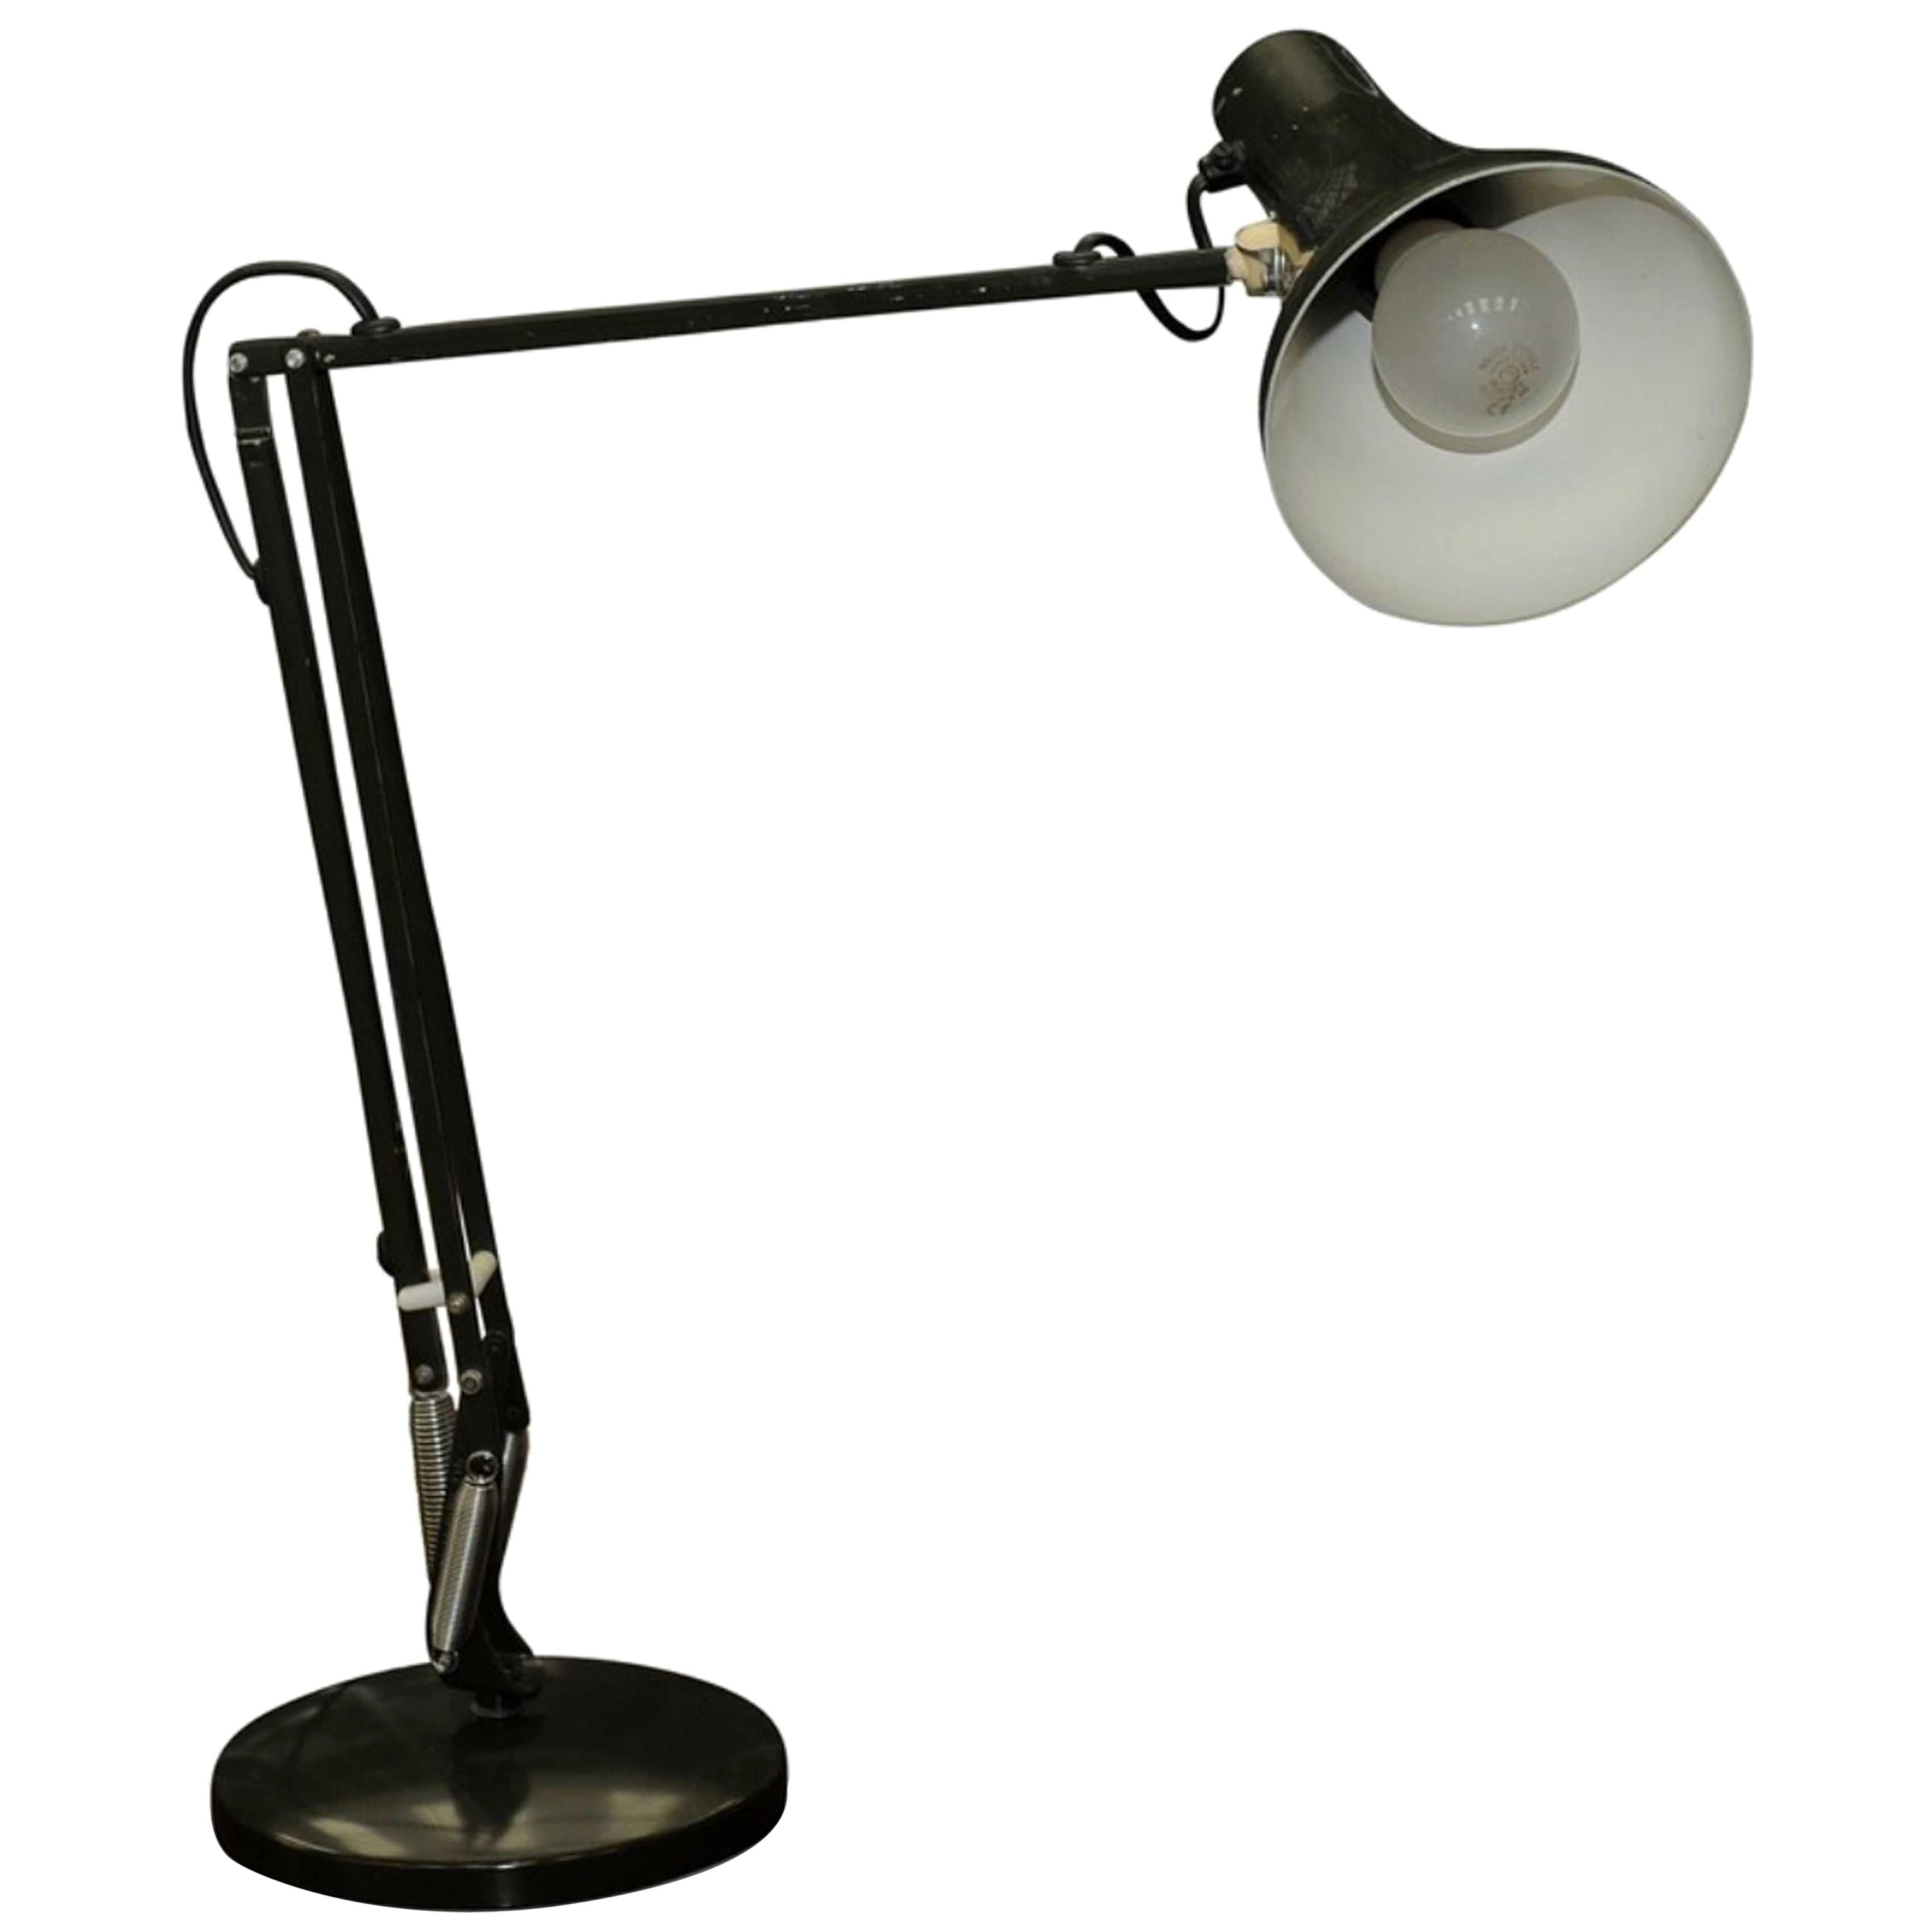 Anglepoise by Herbert Terry Apex 90 Articulated Desk Lamp in Racing Green 1970s

1931: Automotive engineer, George Carwardine developed a theoretical concept for balancing weights using springs, cranks and levers. Using special springs with a